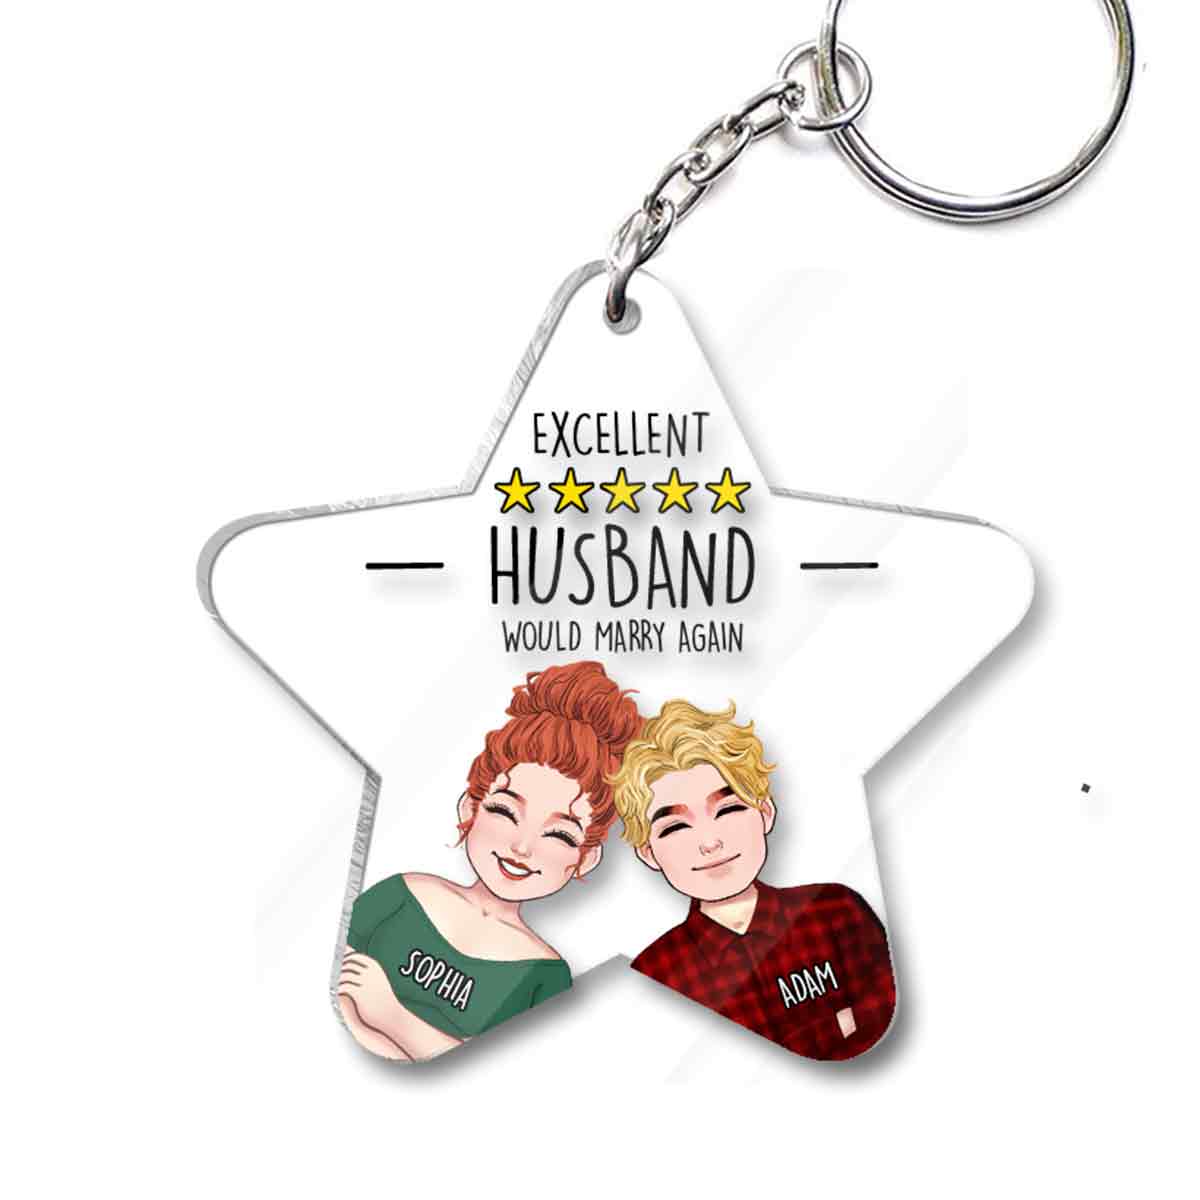 Excellent Husband Wife Five Stars - Personalized Husband And Wife Transparent Keychain